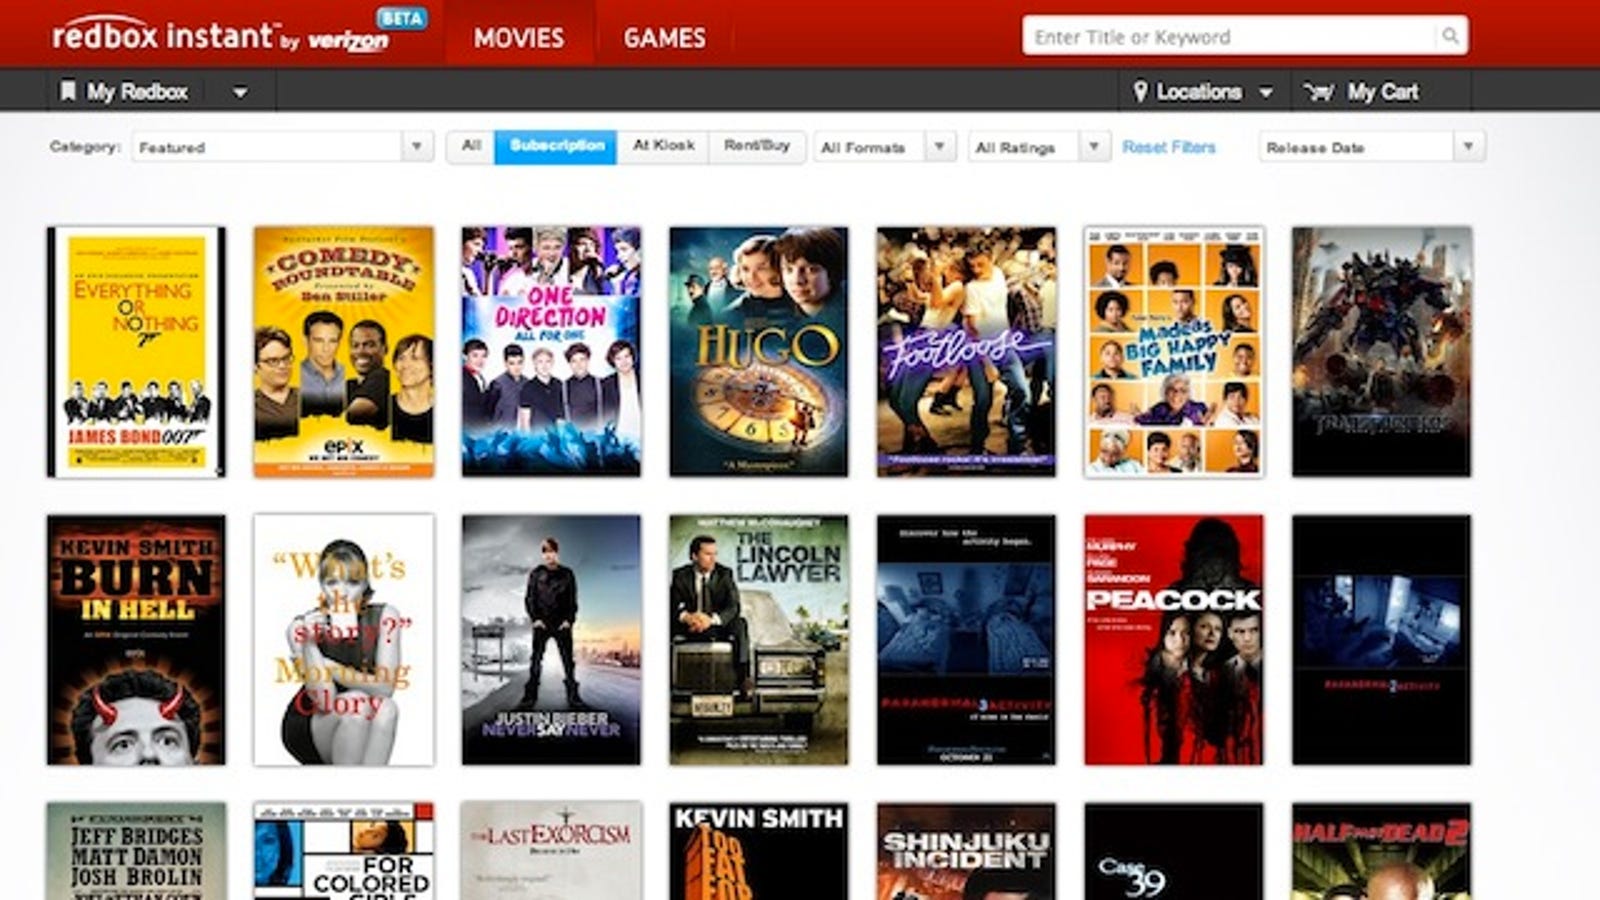 Redbox Instant Launches with NetflixStyle Streaming Movies